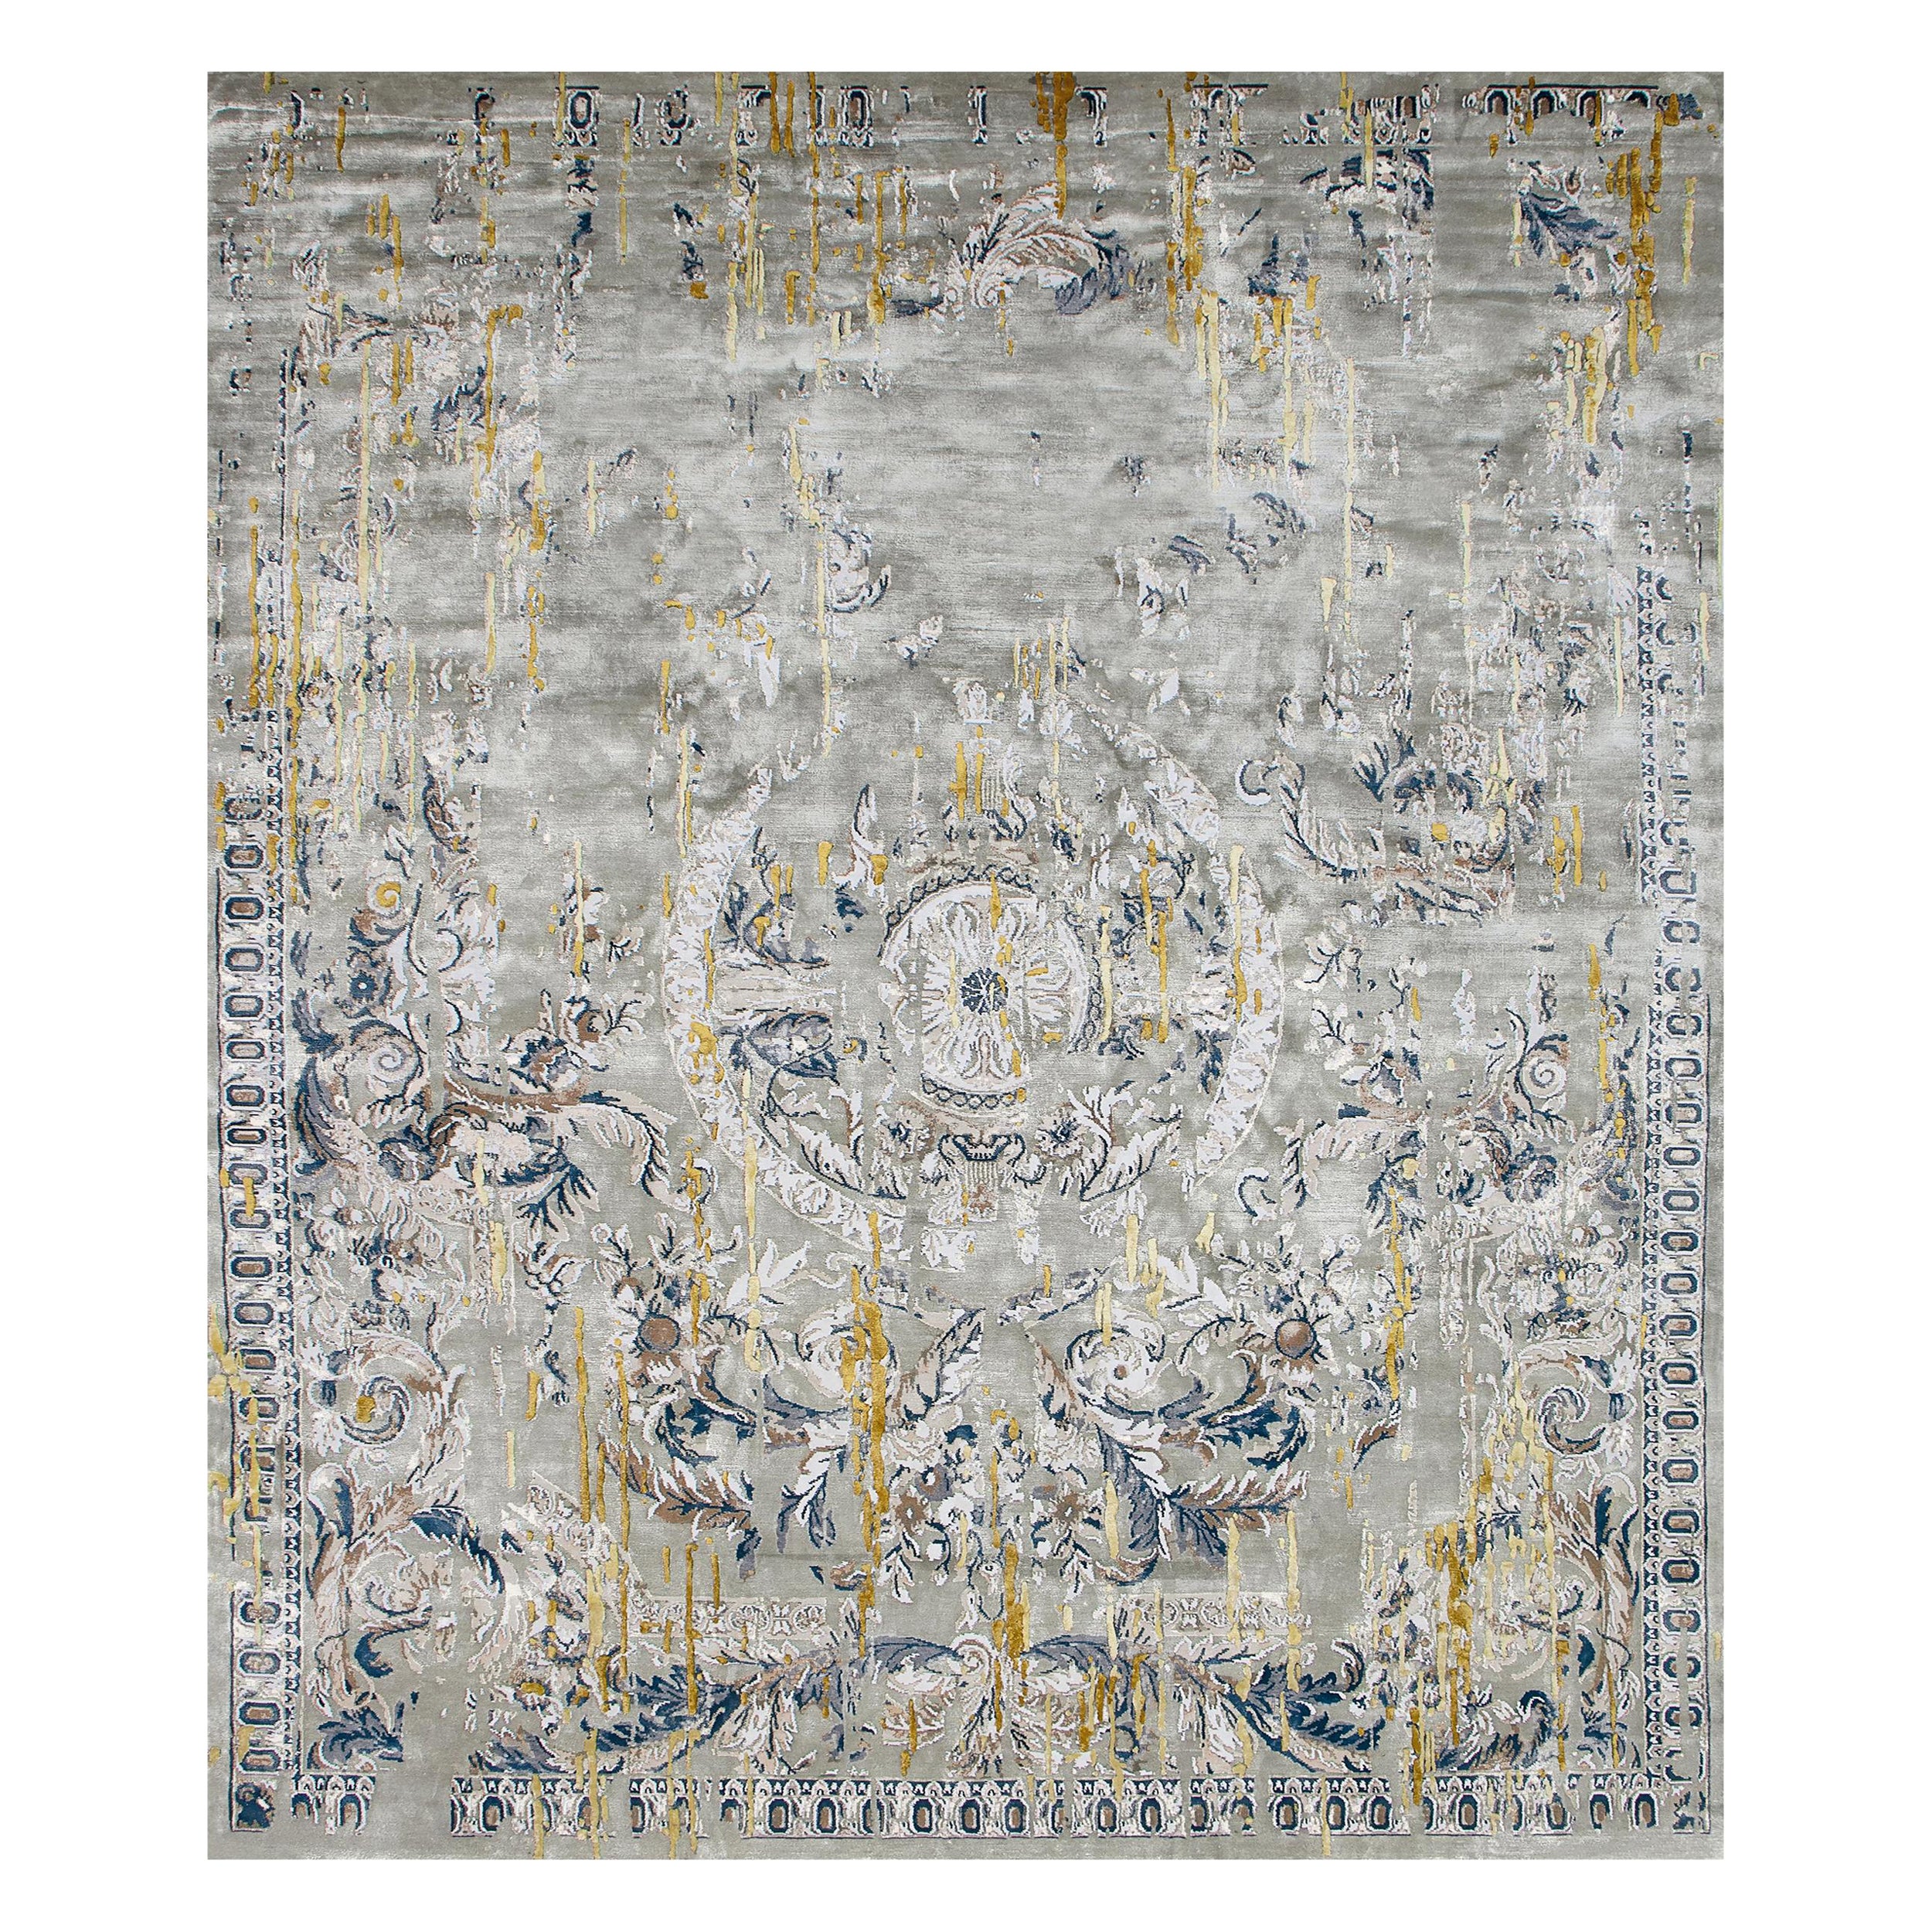 Hand Knotted, Silk Rug, Lully Cytisus, Edition Bougainville